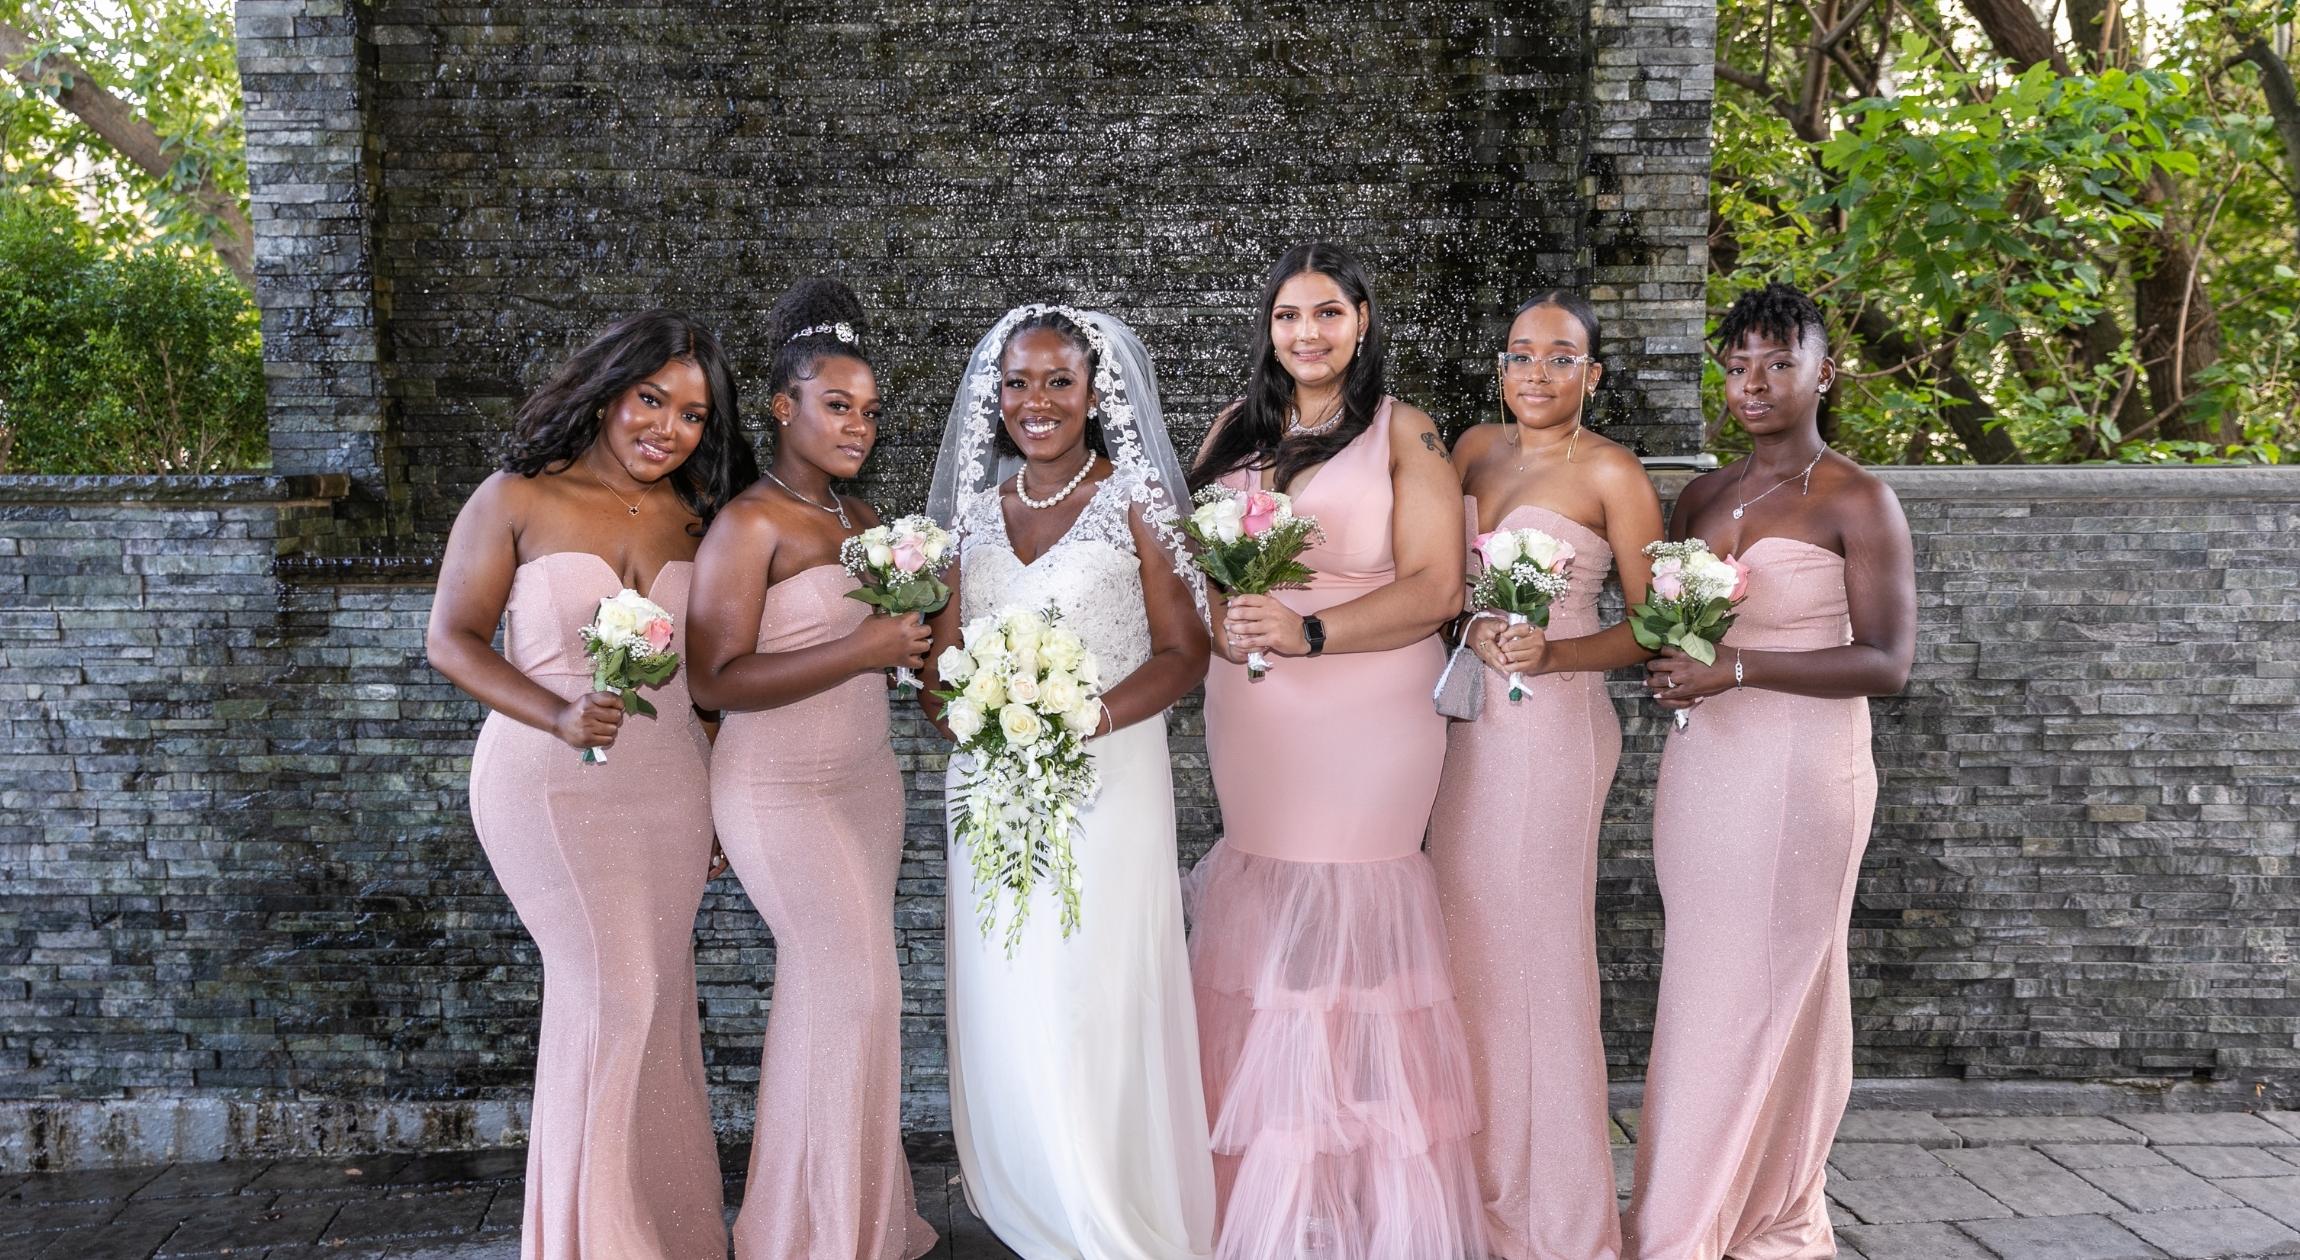 Five bridesmaids in pink dresses surrounded by a Haitian bride